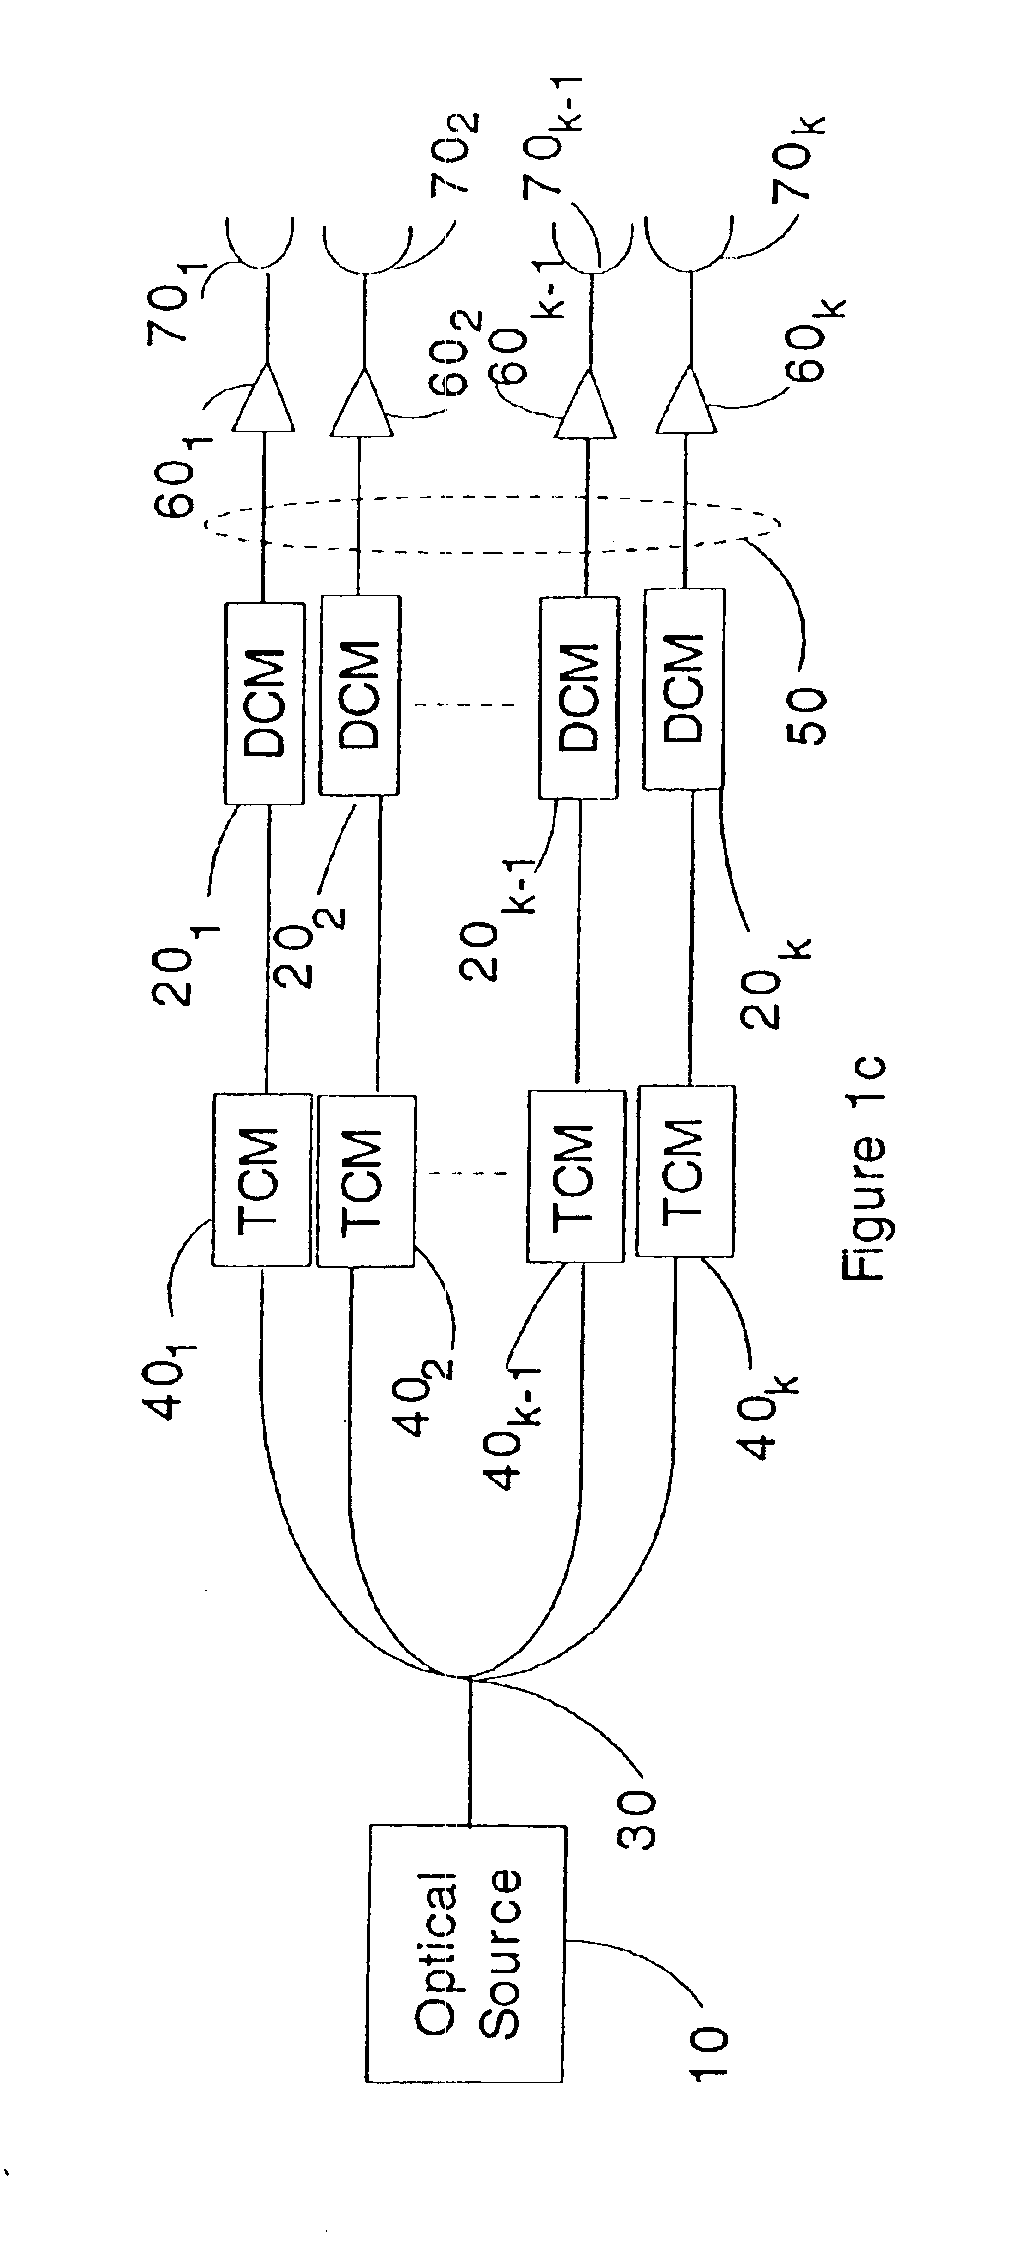 Multi-aperture beam steering system with wavefront correction based on a tunable optical delay line